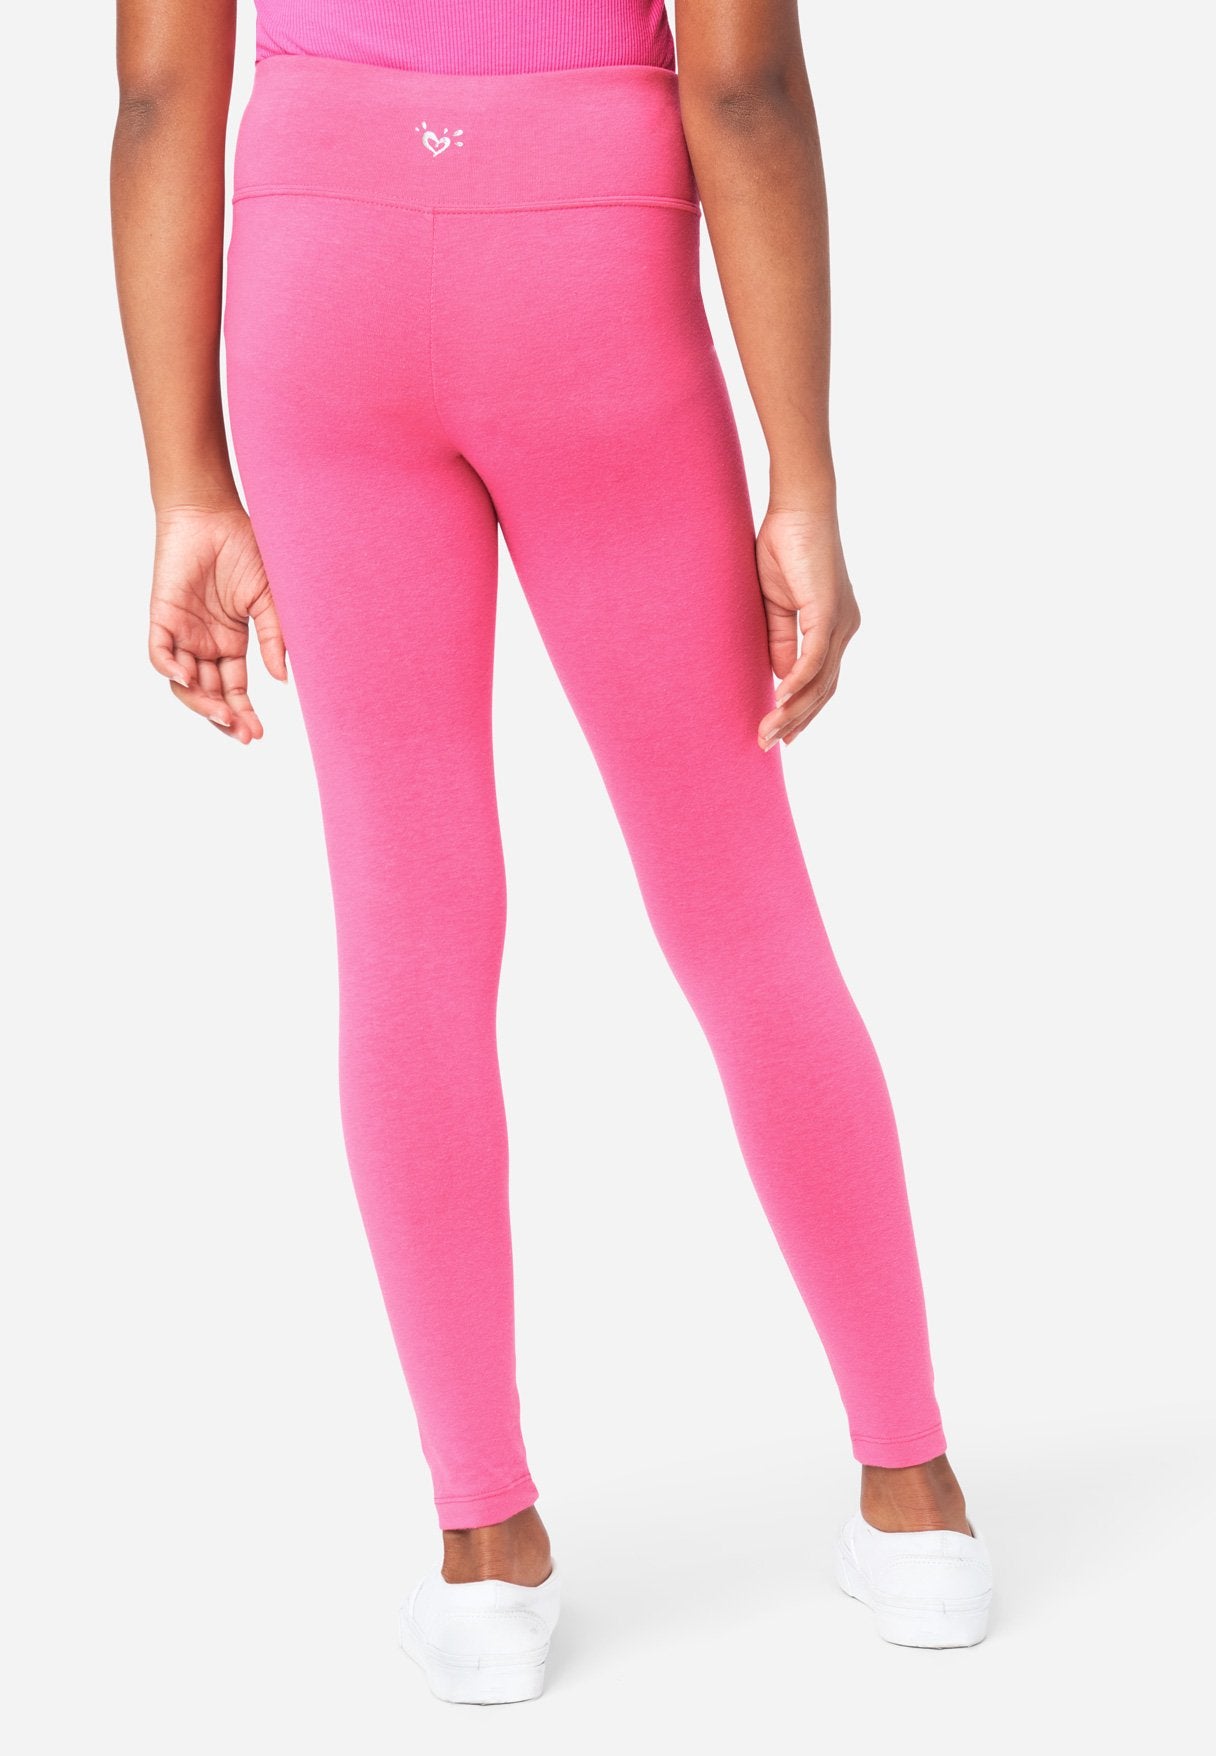 Justice Girl's Everyday Faves Solid Full Length Legging, Sizes XS-XLP -  DroneUp Delivery